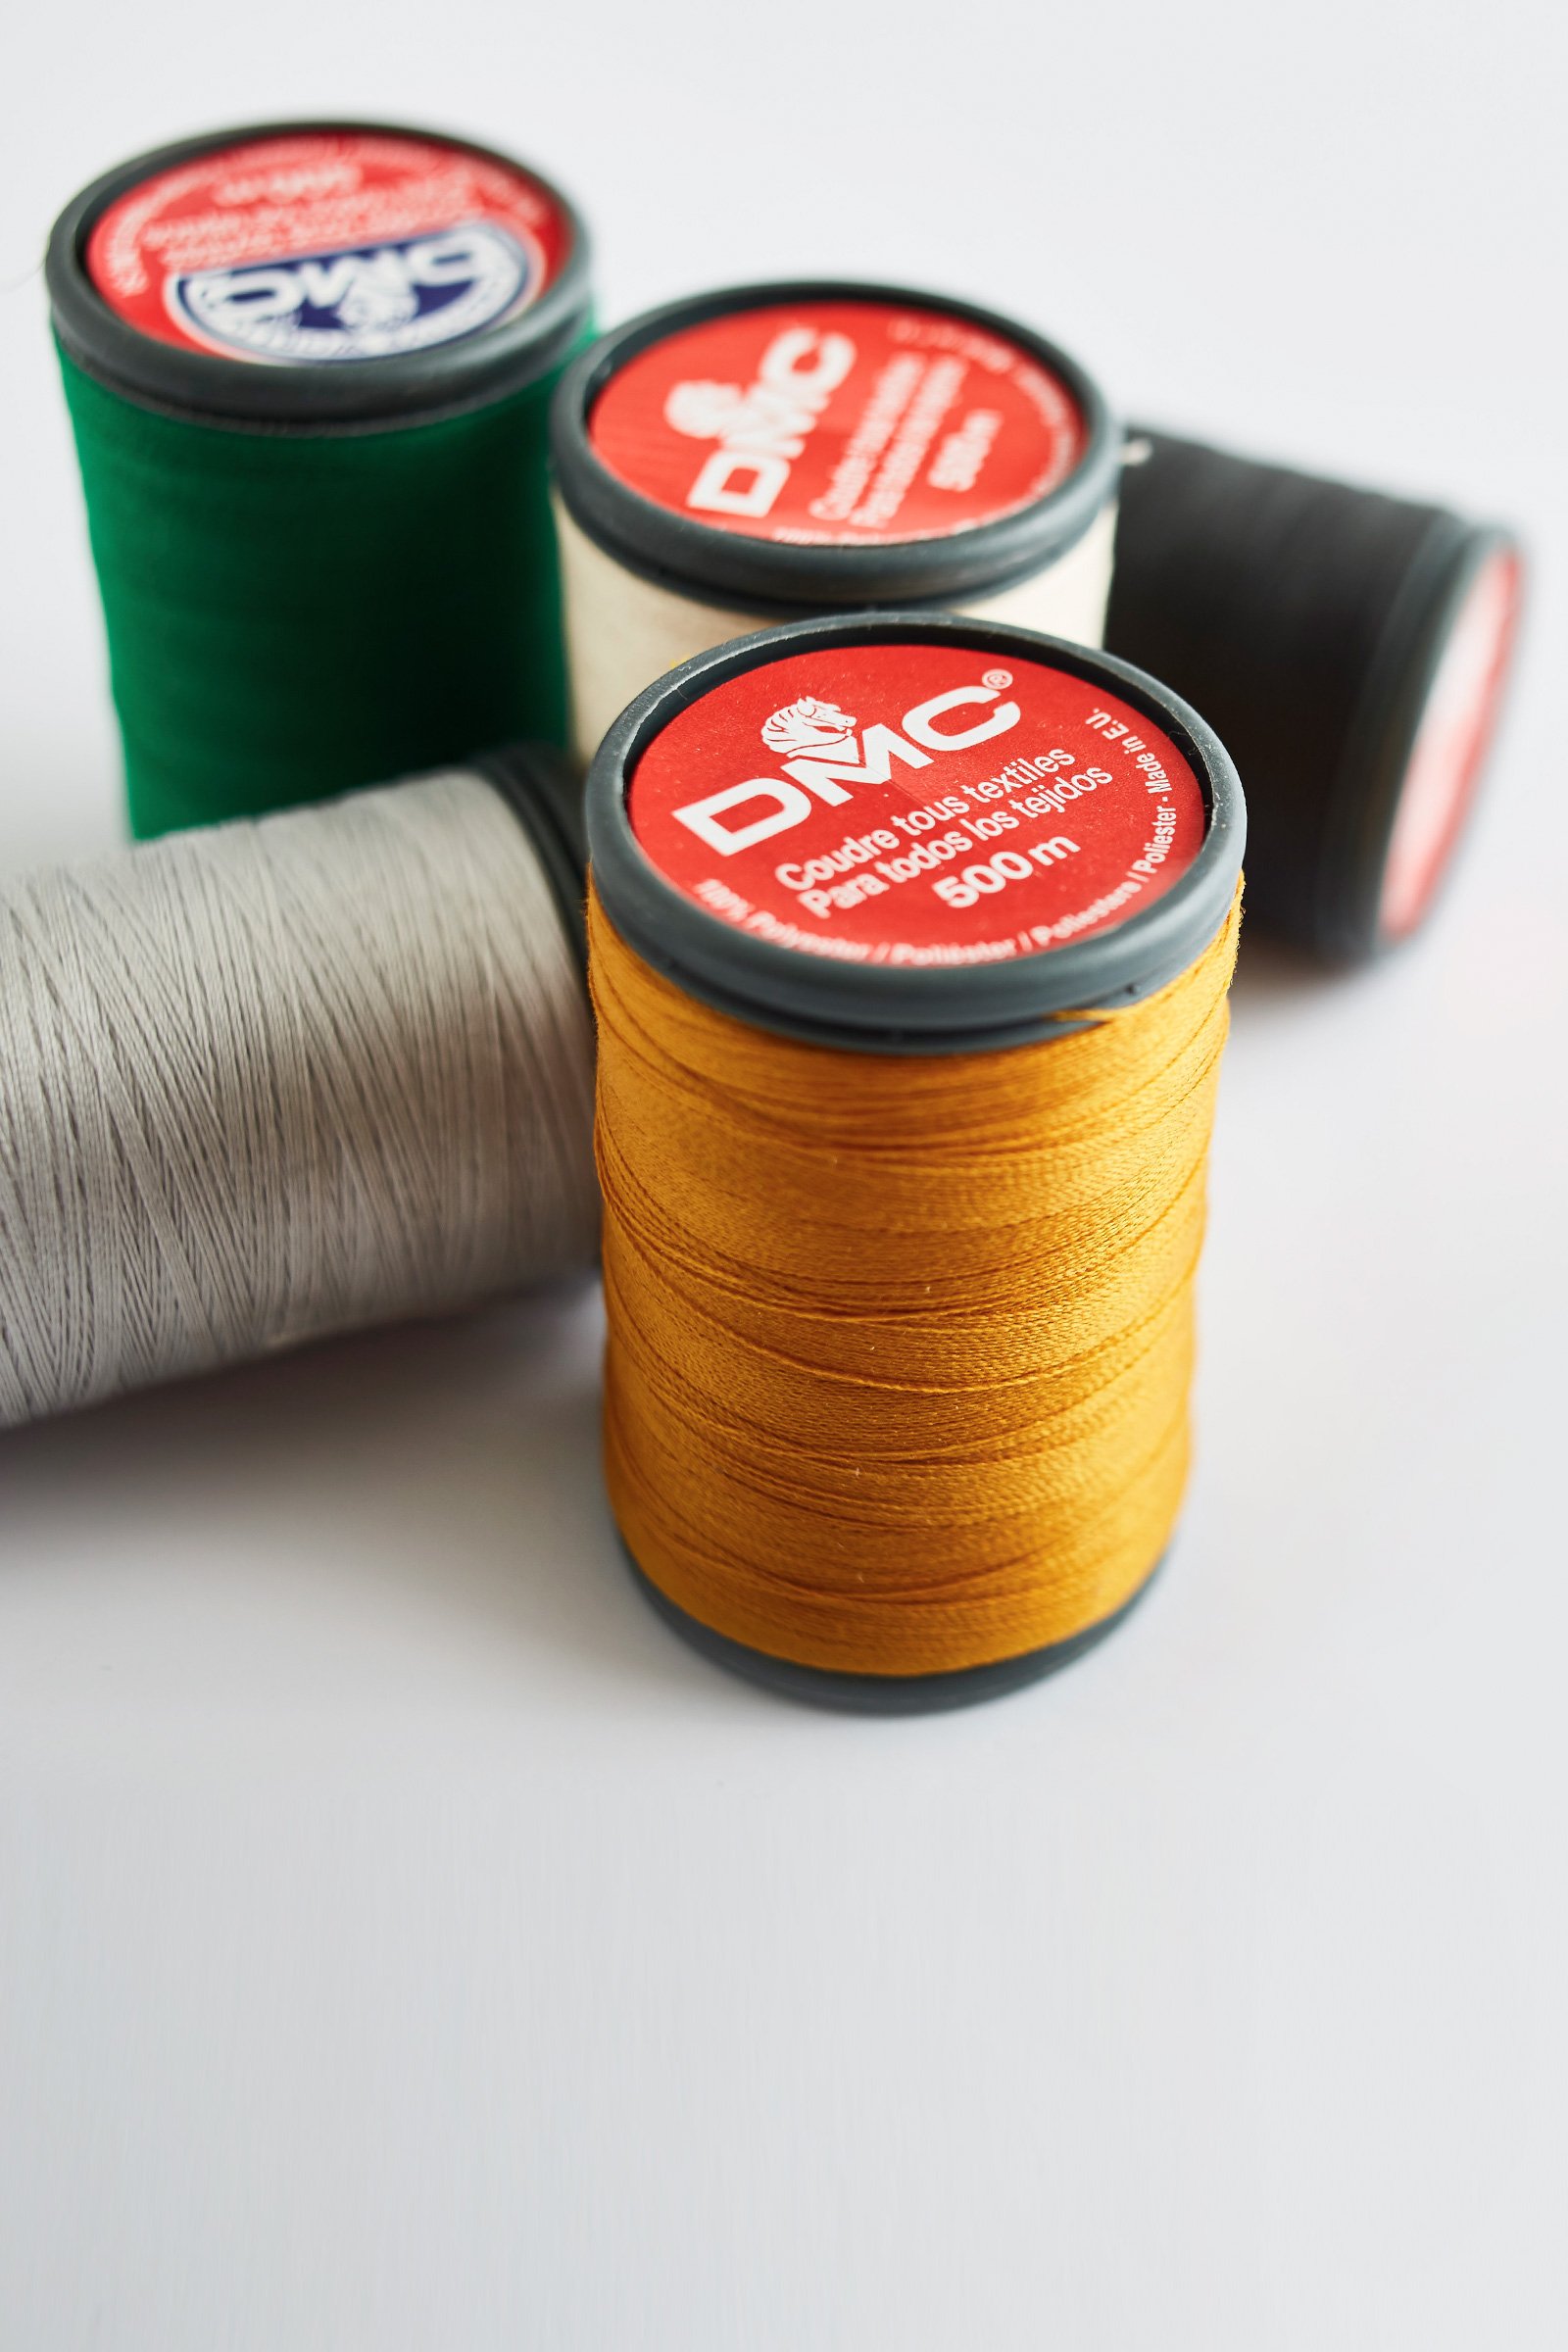 Sewing thread 100% polyester 500m